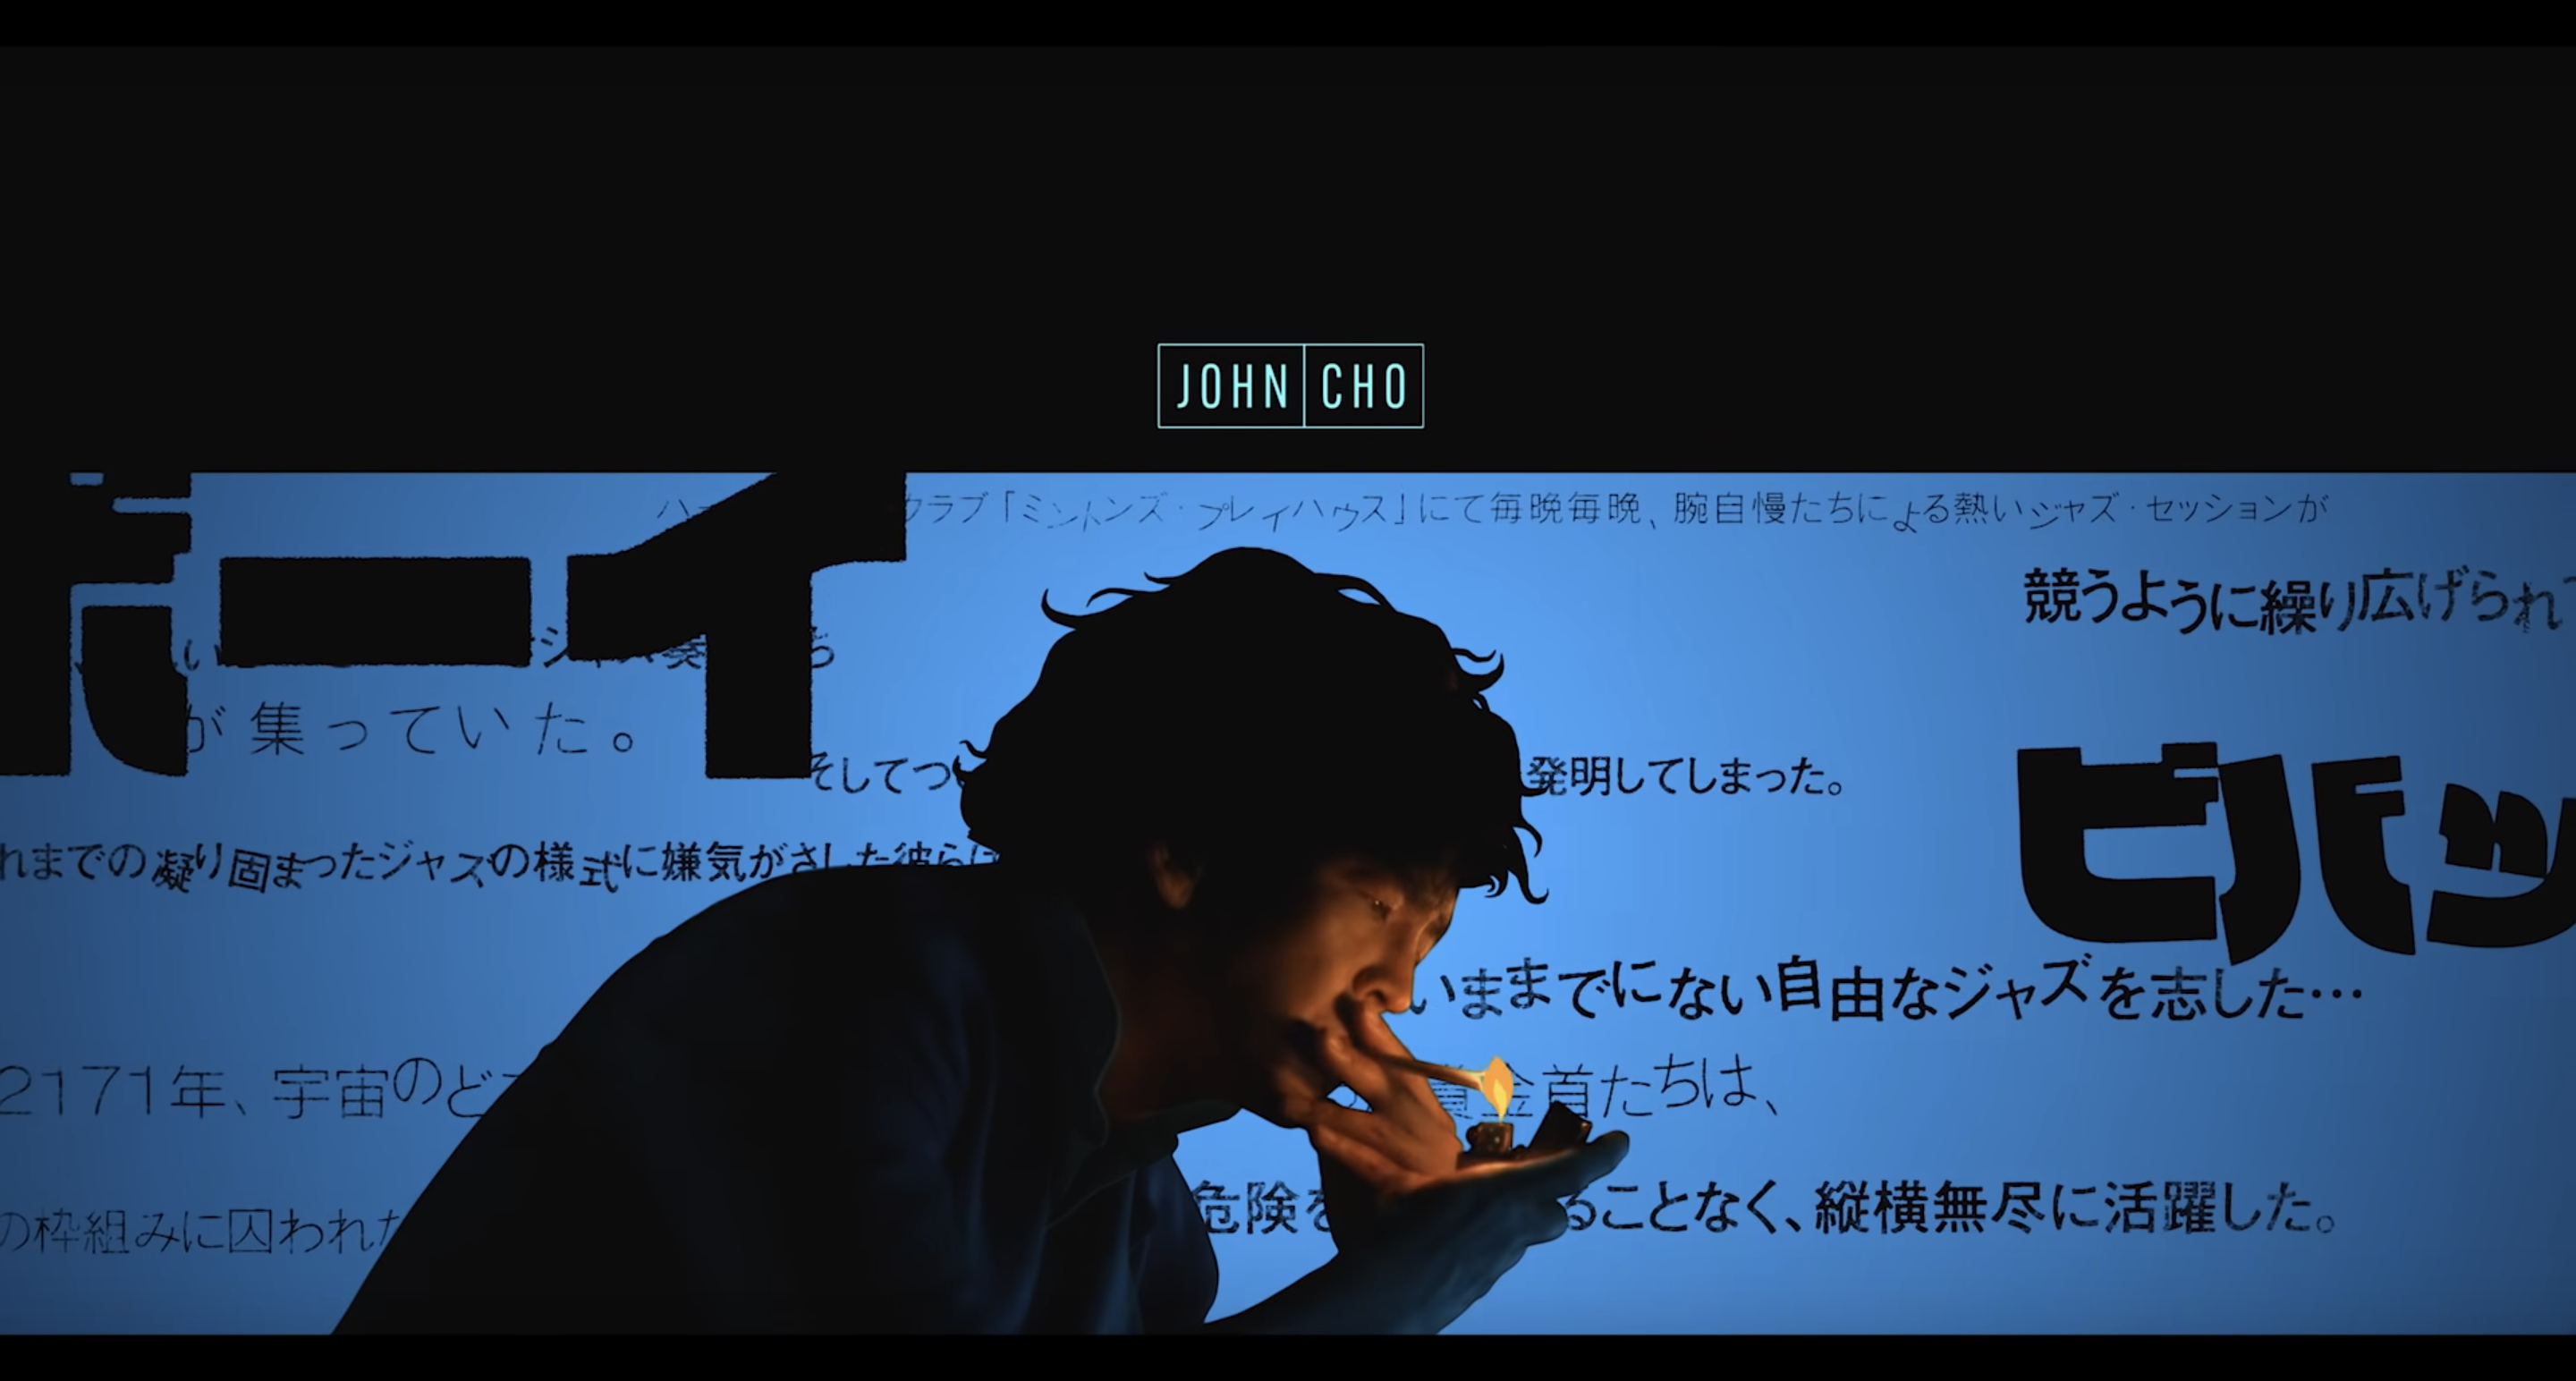 John Cho as Spike Spiegel in the 2021 Cowboy Bebop opening lights a cigarette, shrouded in shadow except for the glow of the lighter.